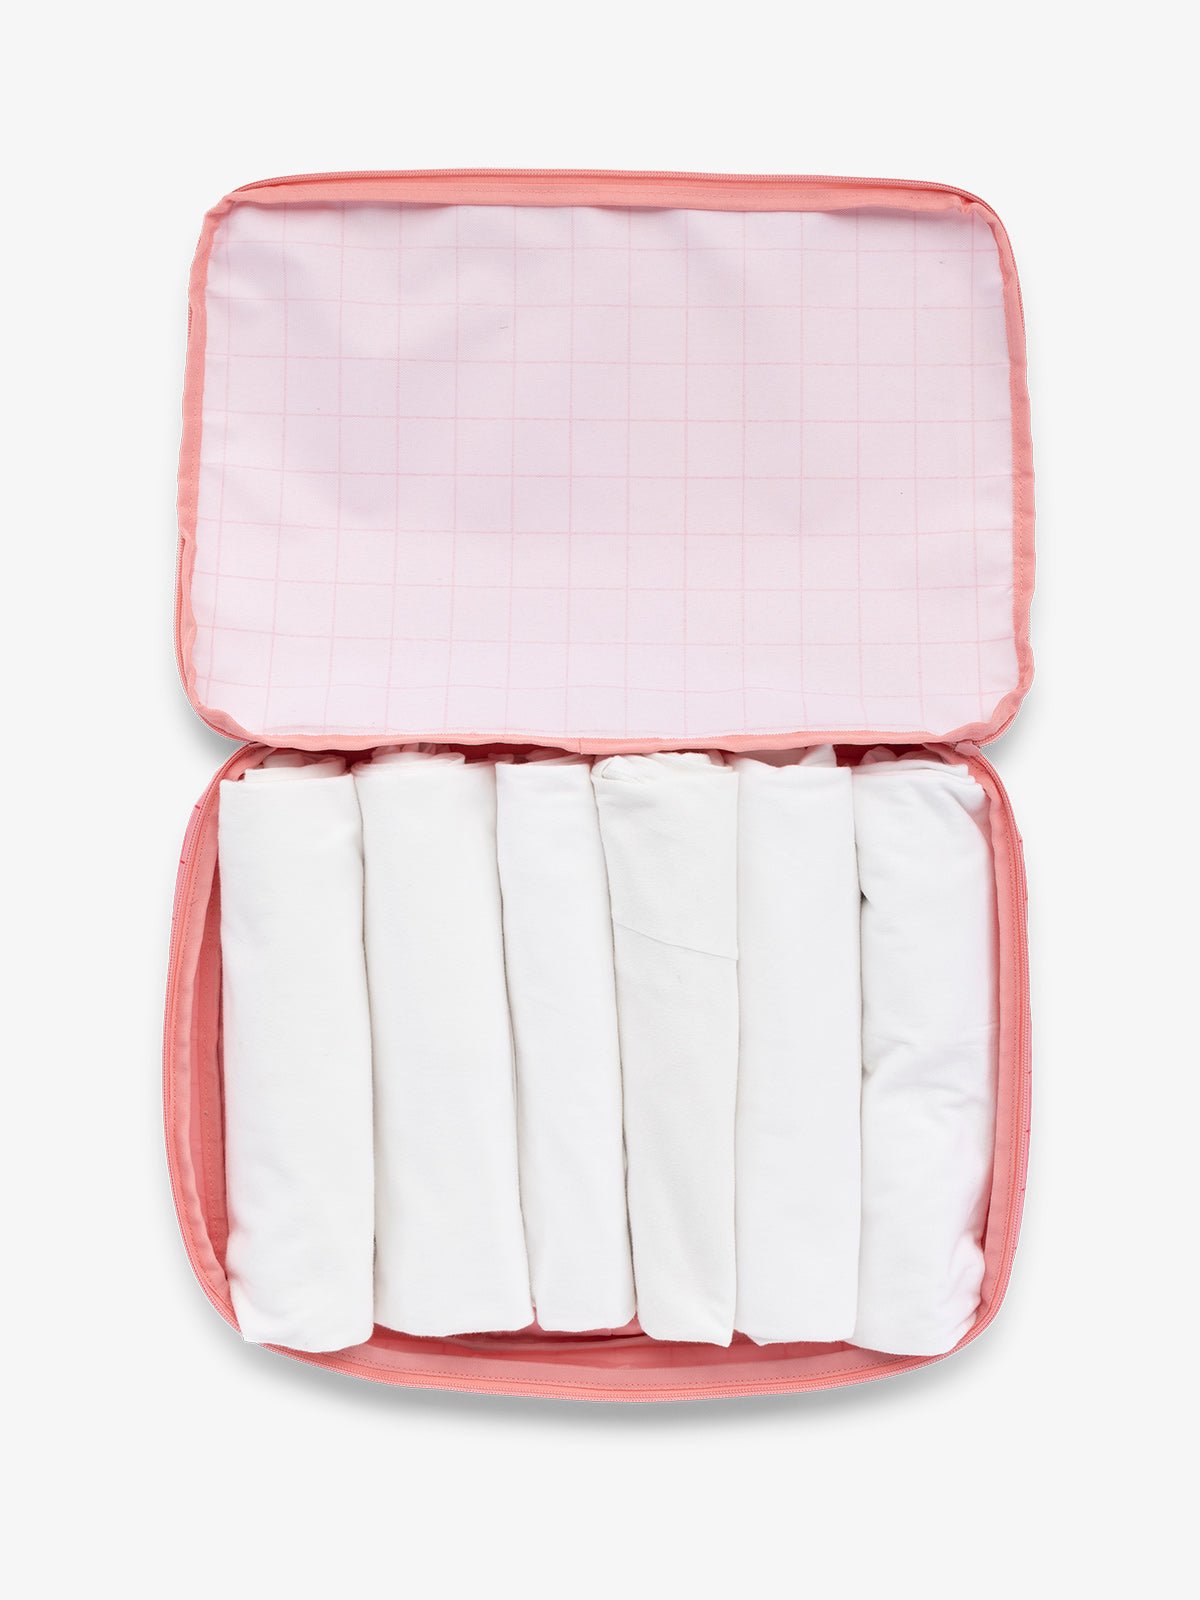 CALPAK Large Compression Packing cubes for travel made with durable materials in pink